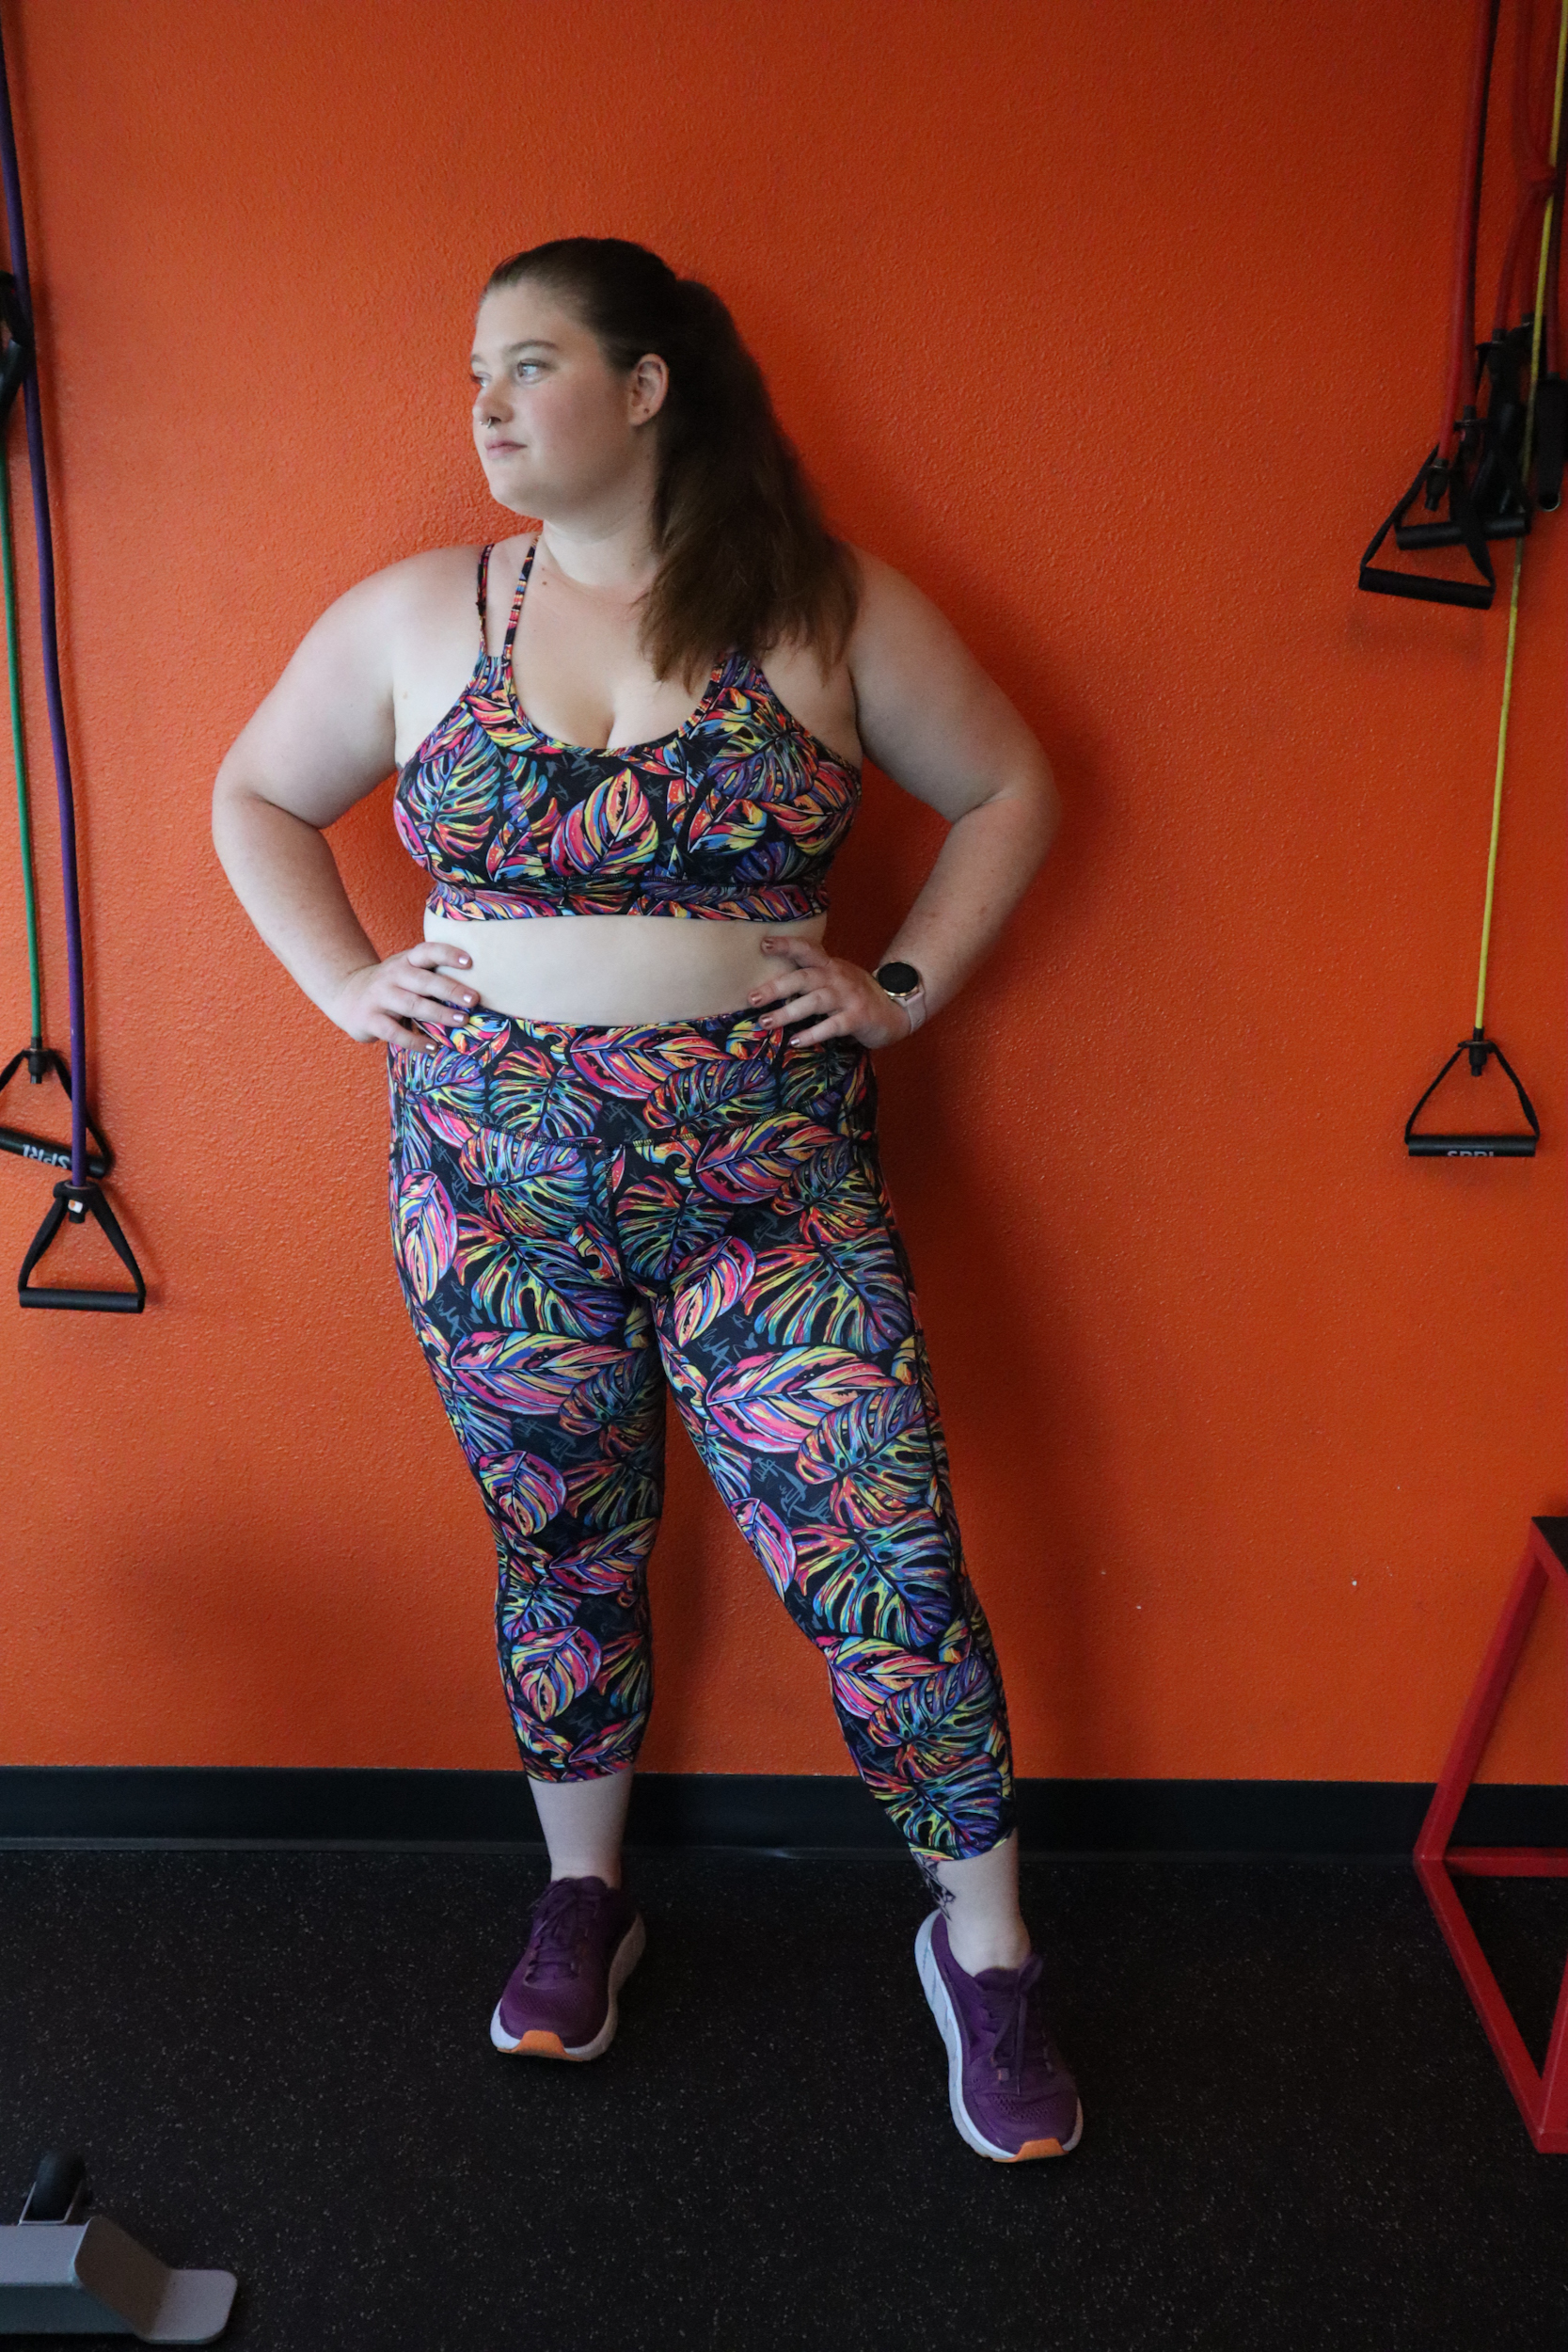 Constantly Varied Gear CVG Tropic Like Its Hot Crossfit Capri Leggings Size  XL - $63 - From Amber